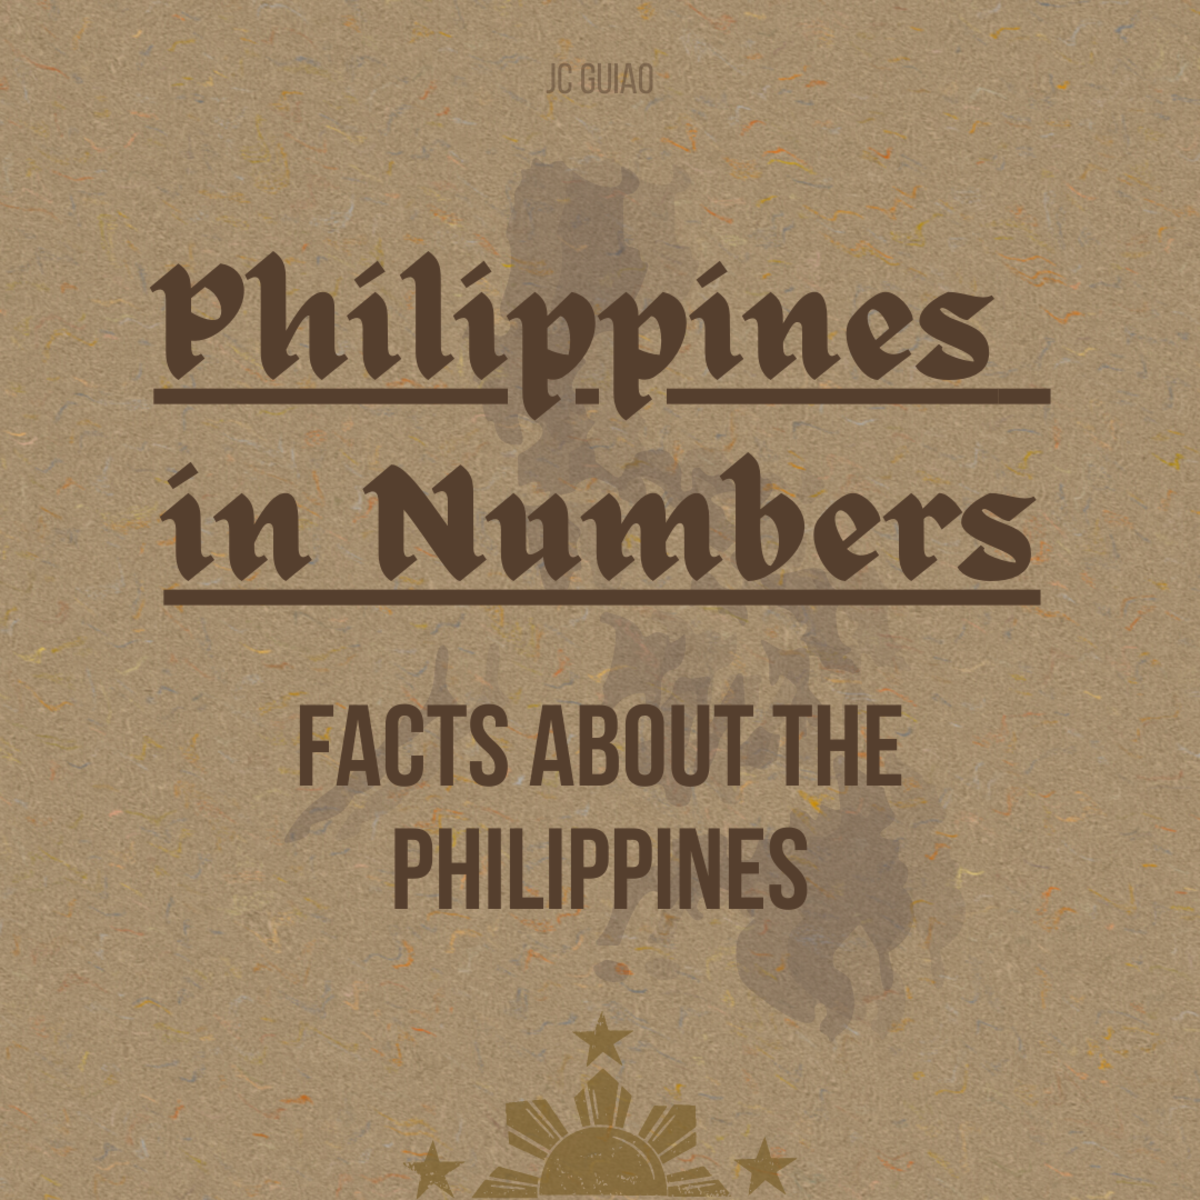 Philippines in Numbers: Facts About the Philippines